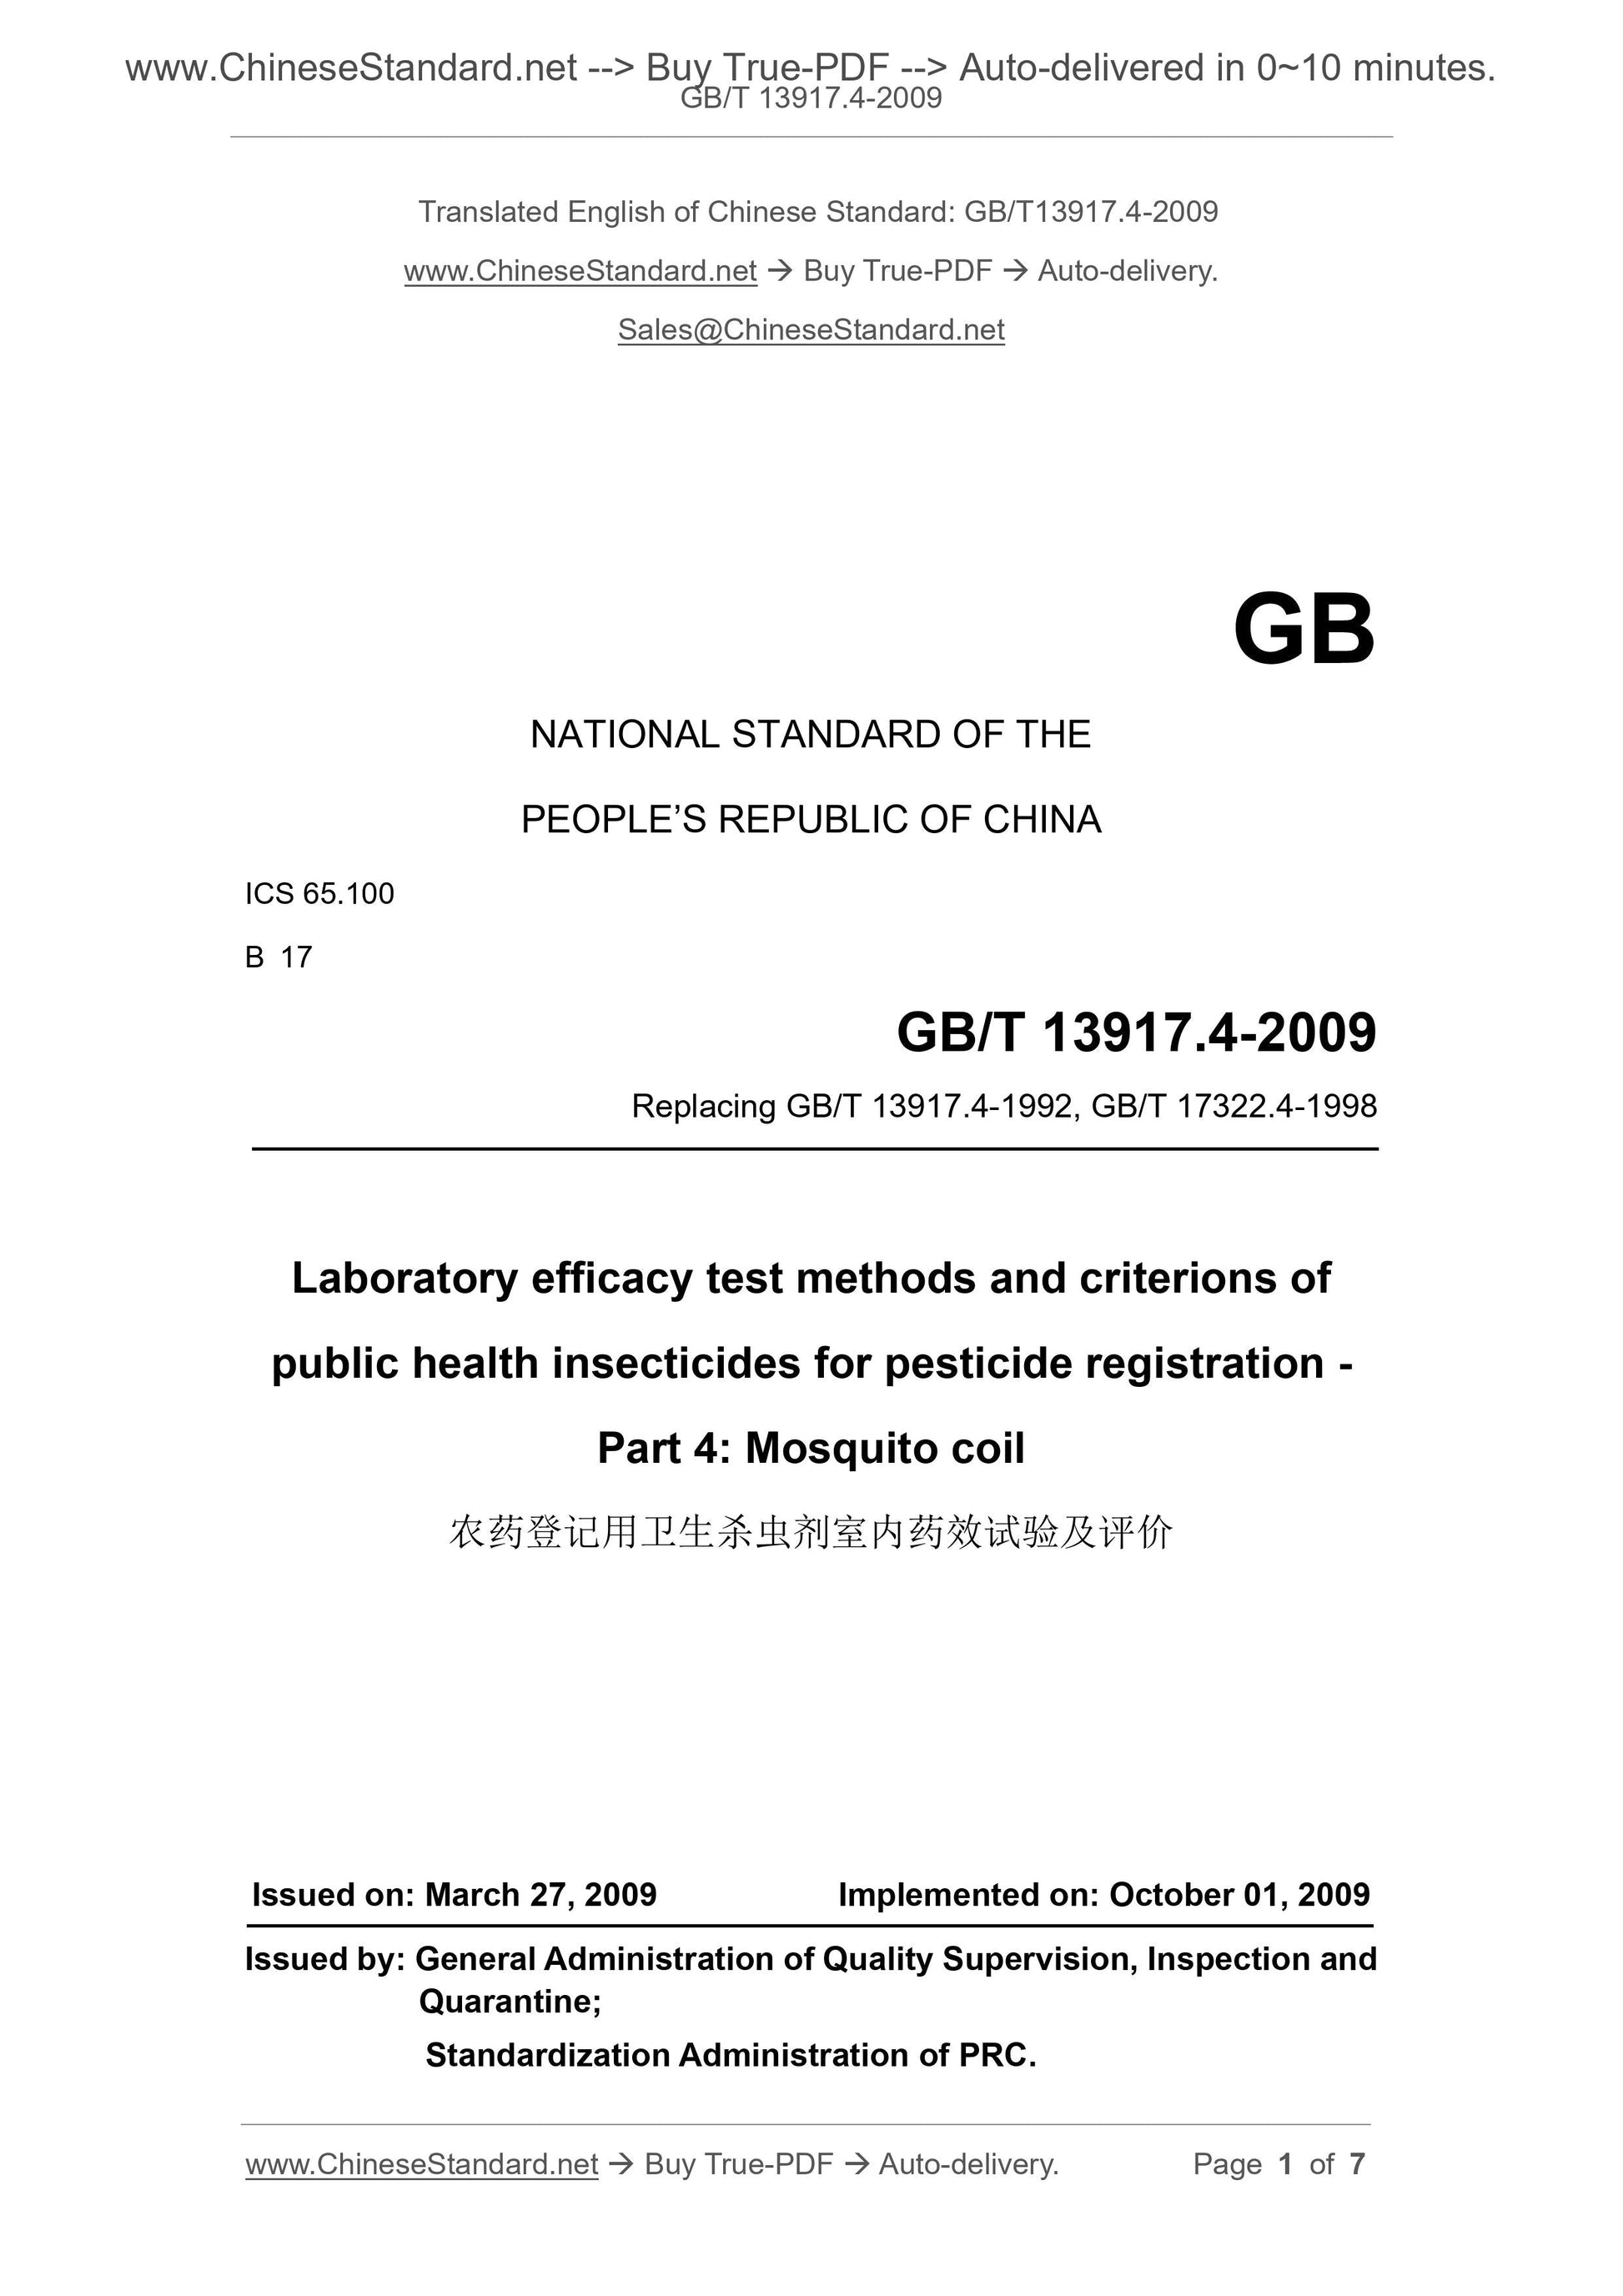 GB/T 13917.4-2009 Page 1